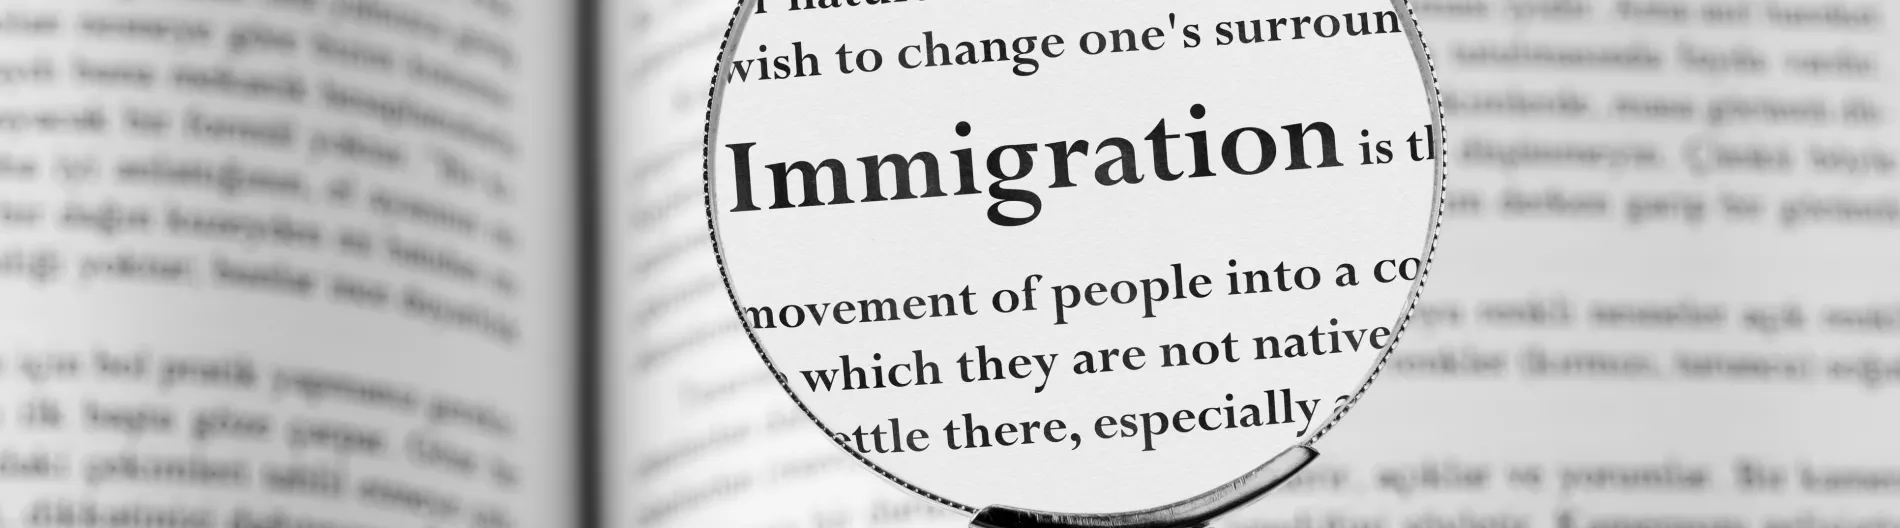 Dictionary with definition of immigration under a microscope